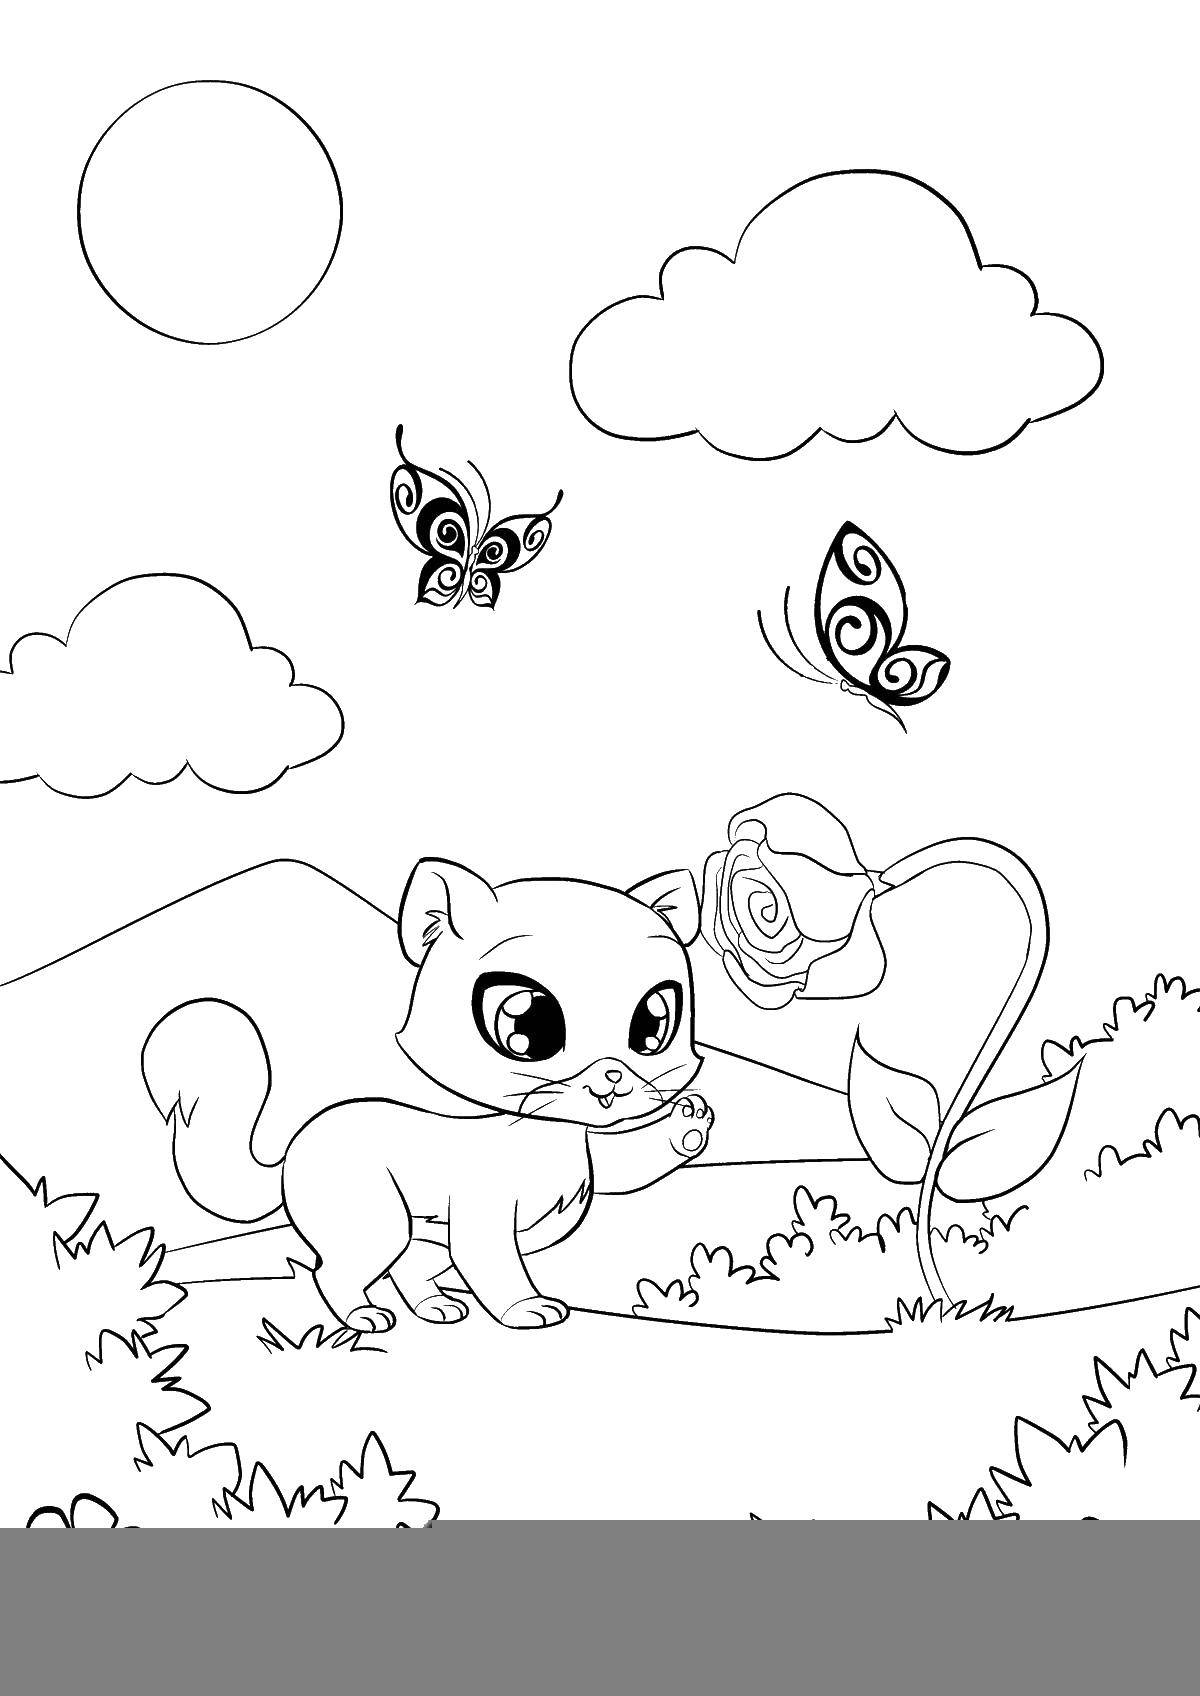 Coloring Kitty and rose. Category kittens. Tags:  kitty, rose, butterfly.